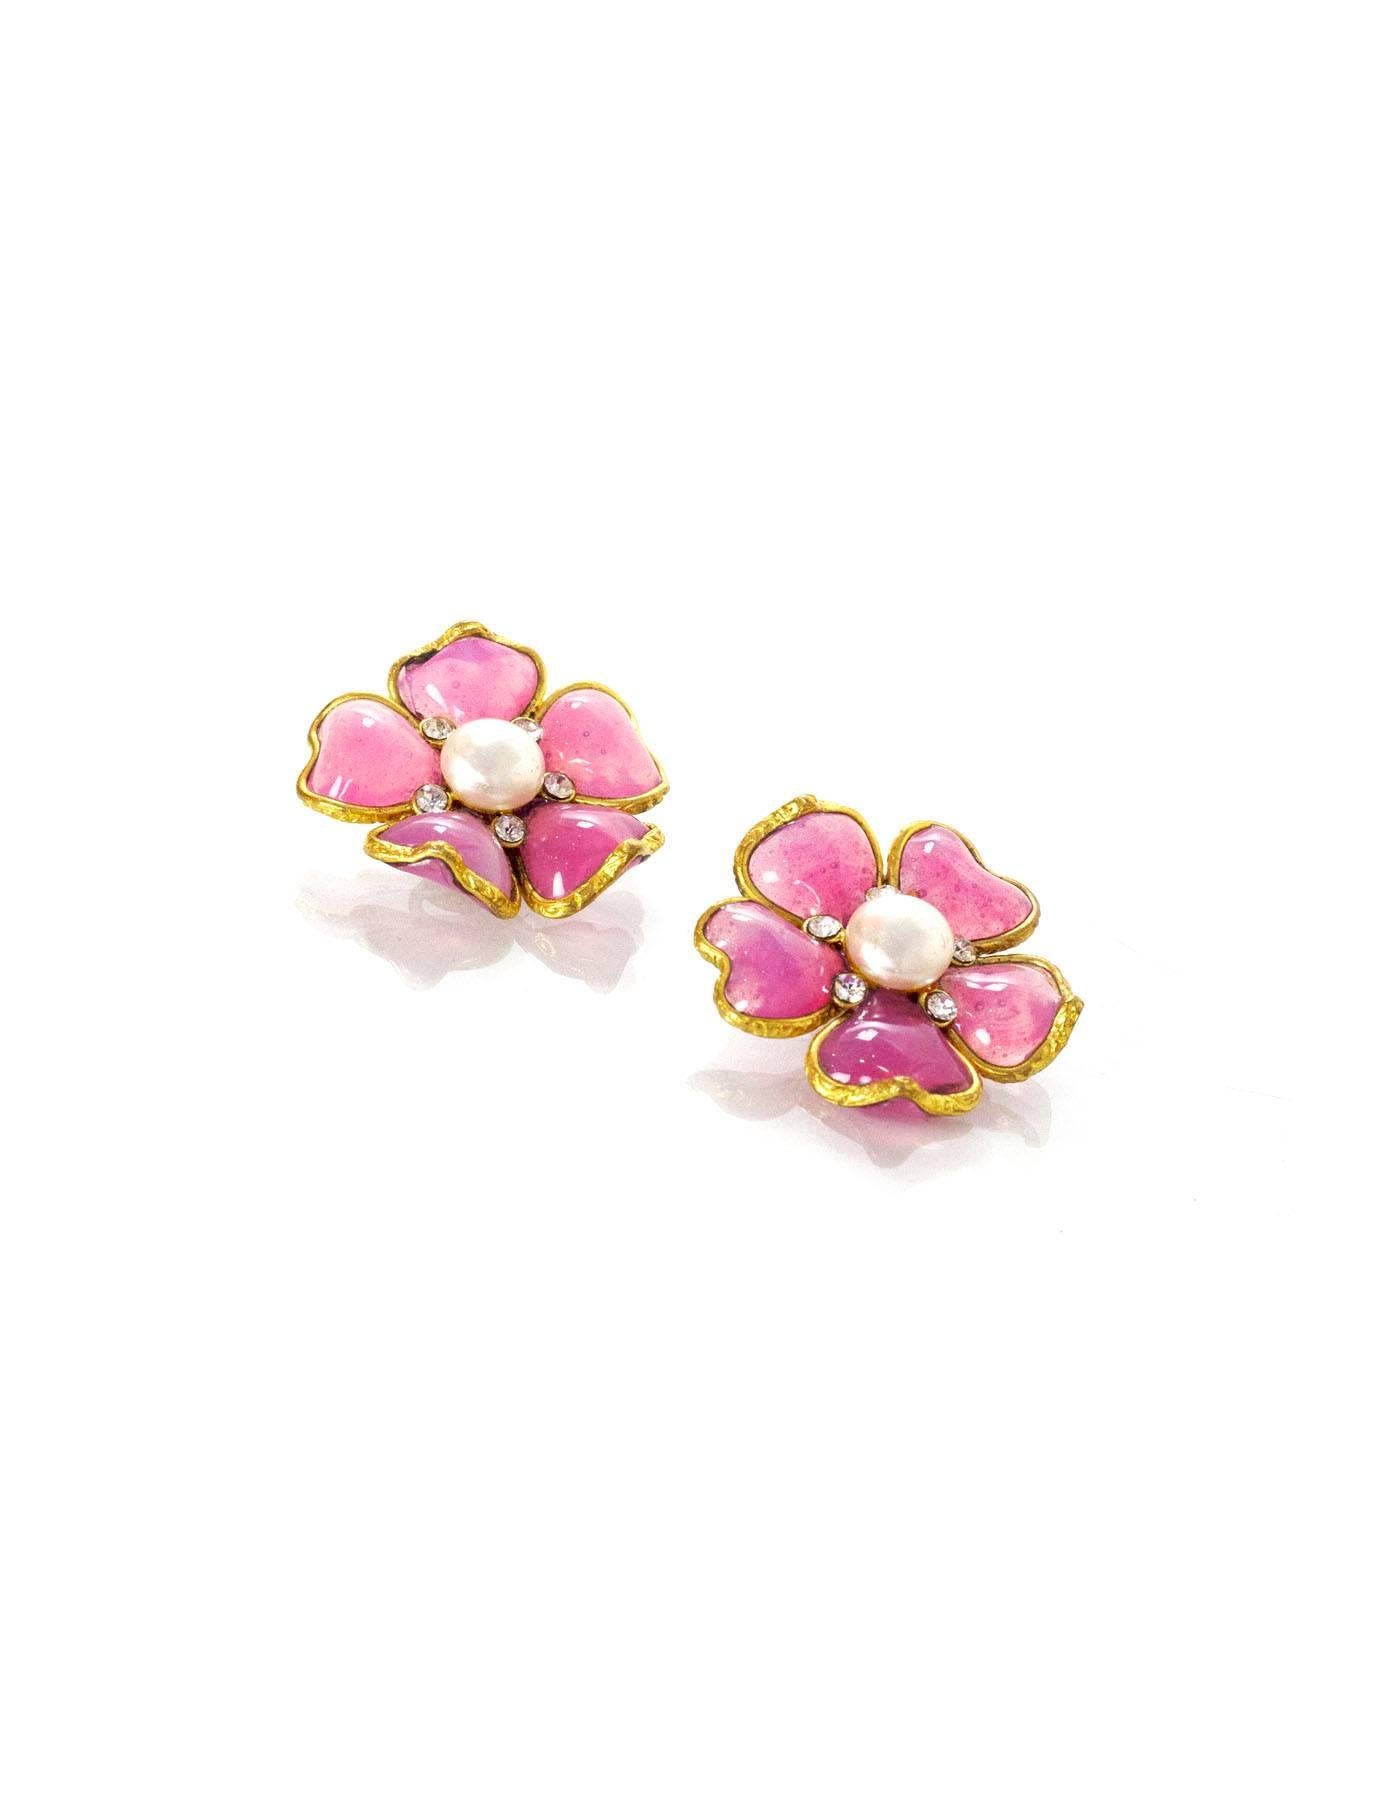 100% Authentic Chanel Pink Gripoix Flower Clip On Earrings. Features pink Gripoix petals with faux pearl center. Gold and crystal detail. Excellent pre-owned condition with the exception of scuffs on the center pearl.

Made In: France
Year of